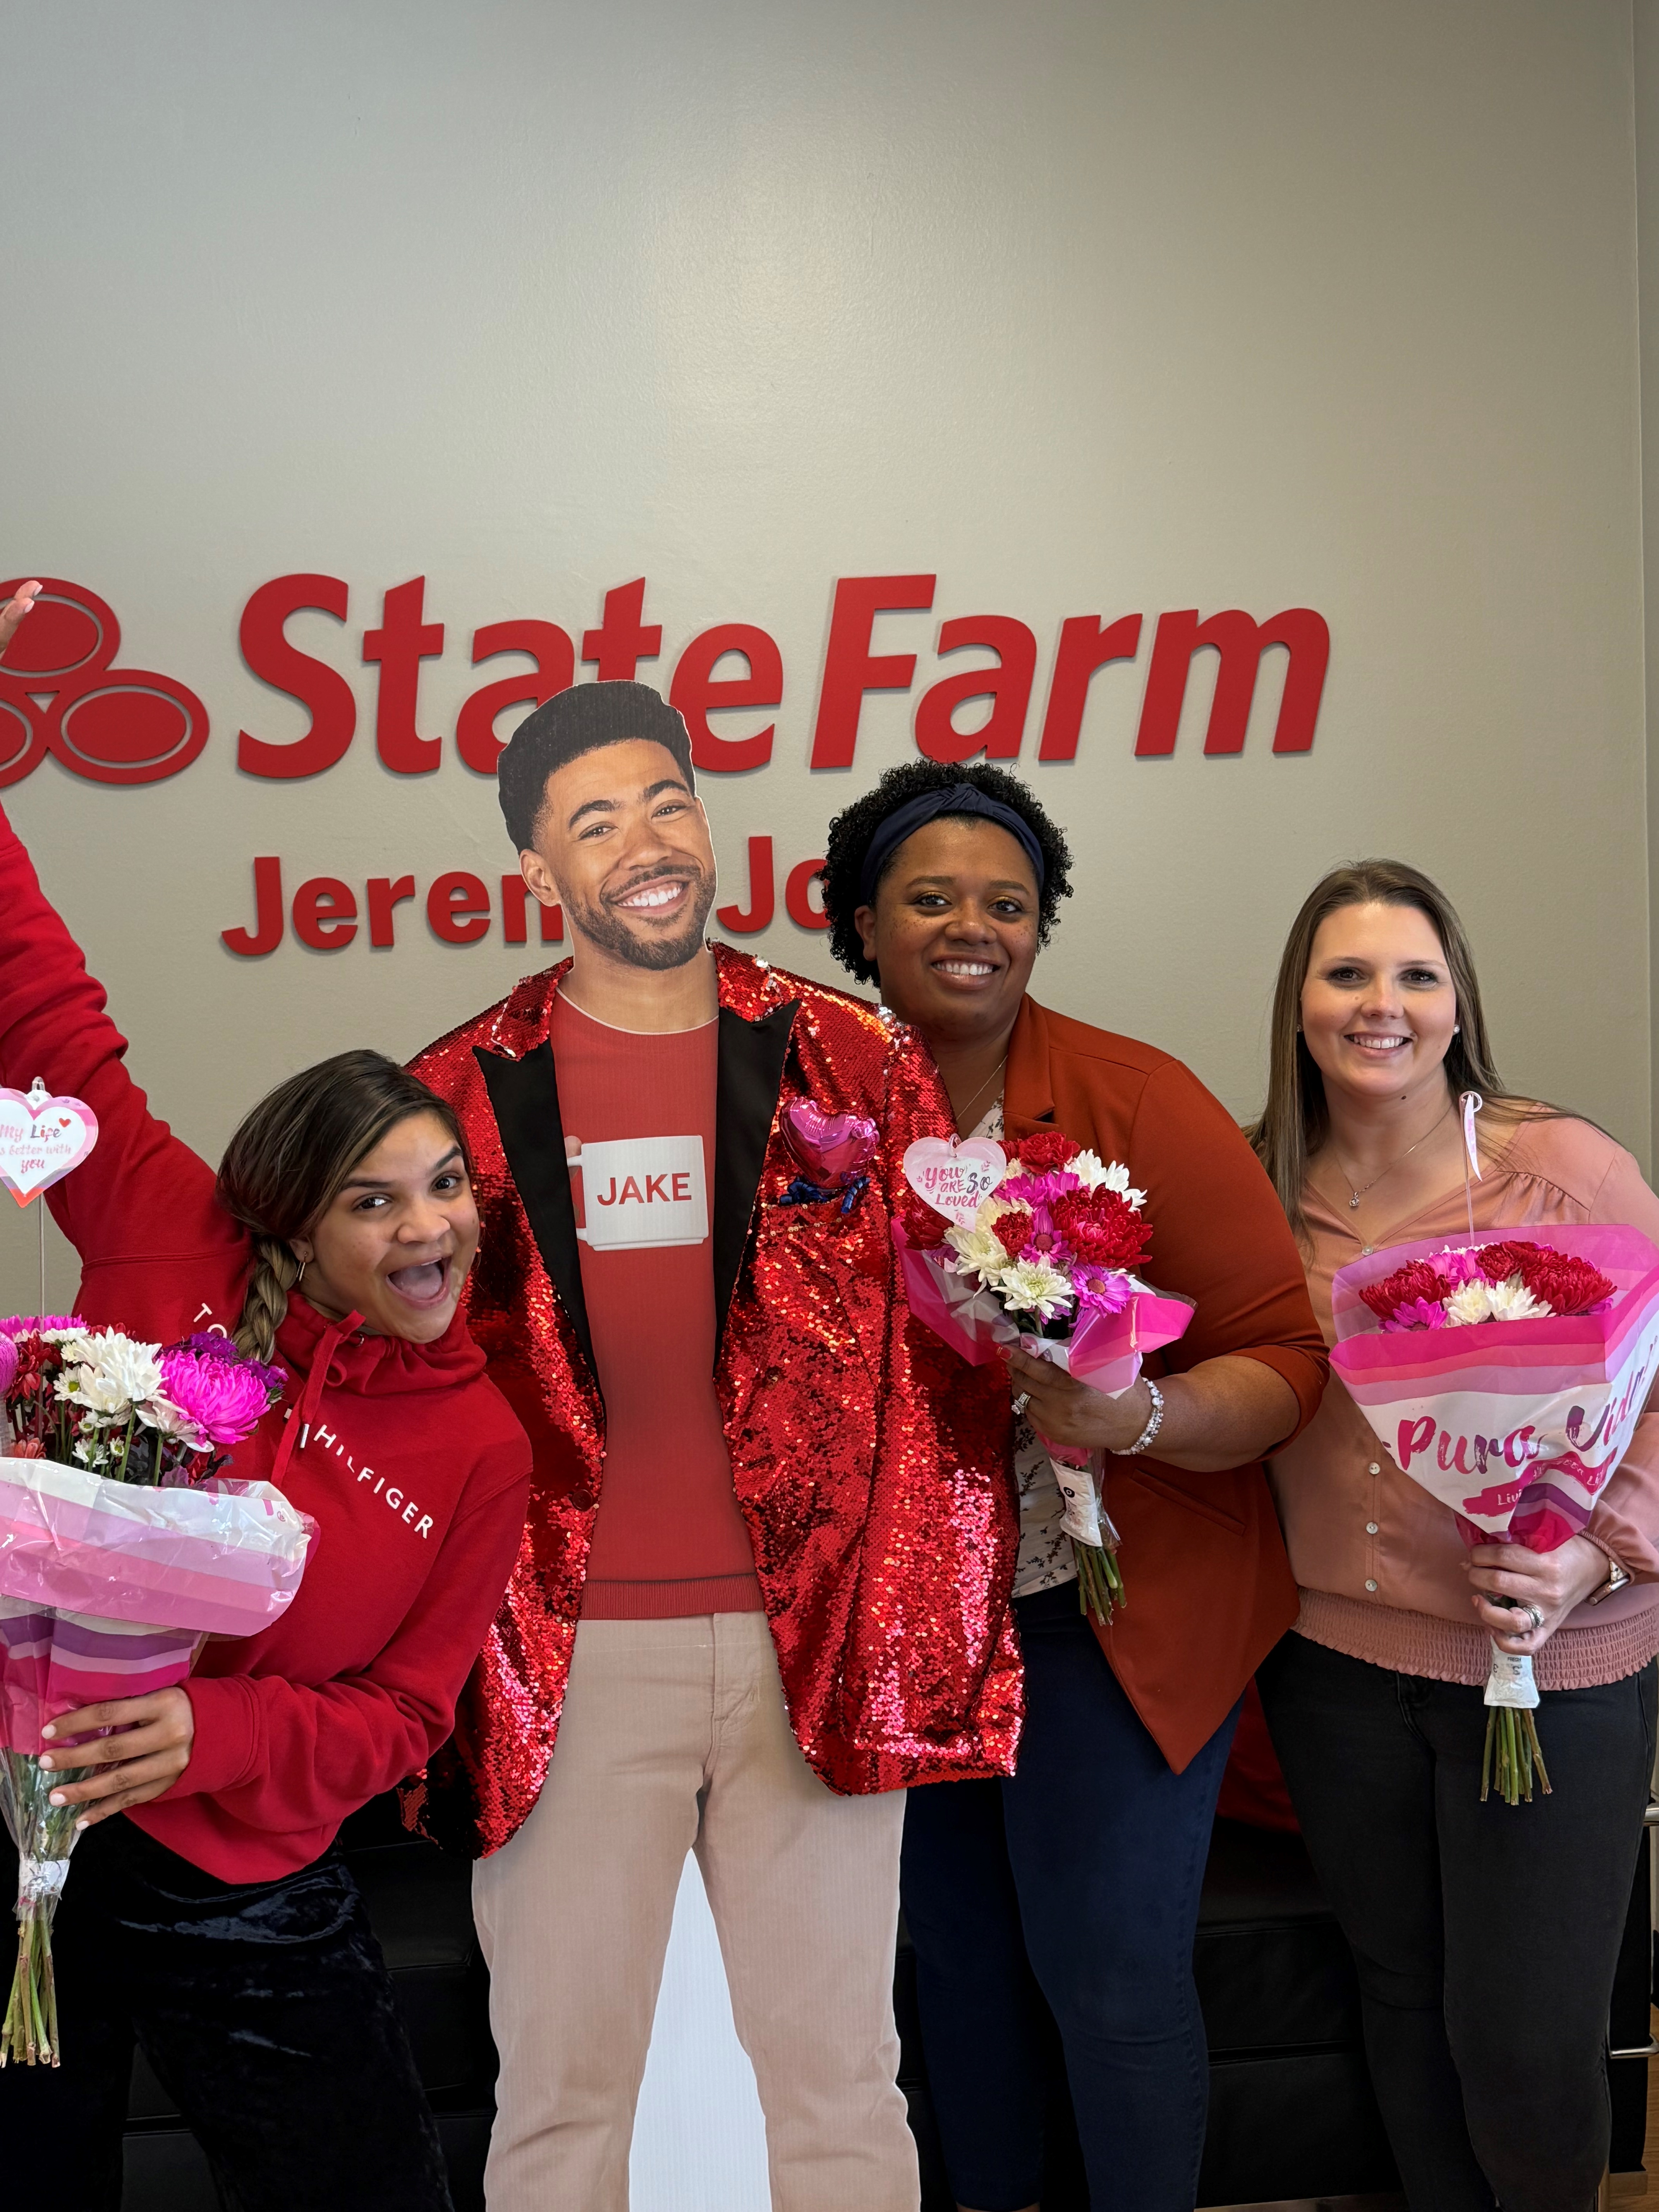 Happy Valentine's Day from the team at Jeremy Jones - State Farm Insurance Agent